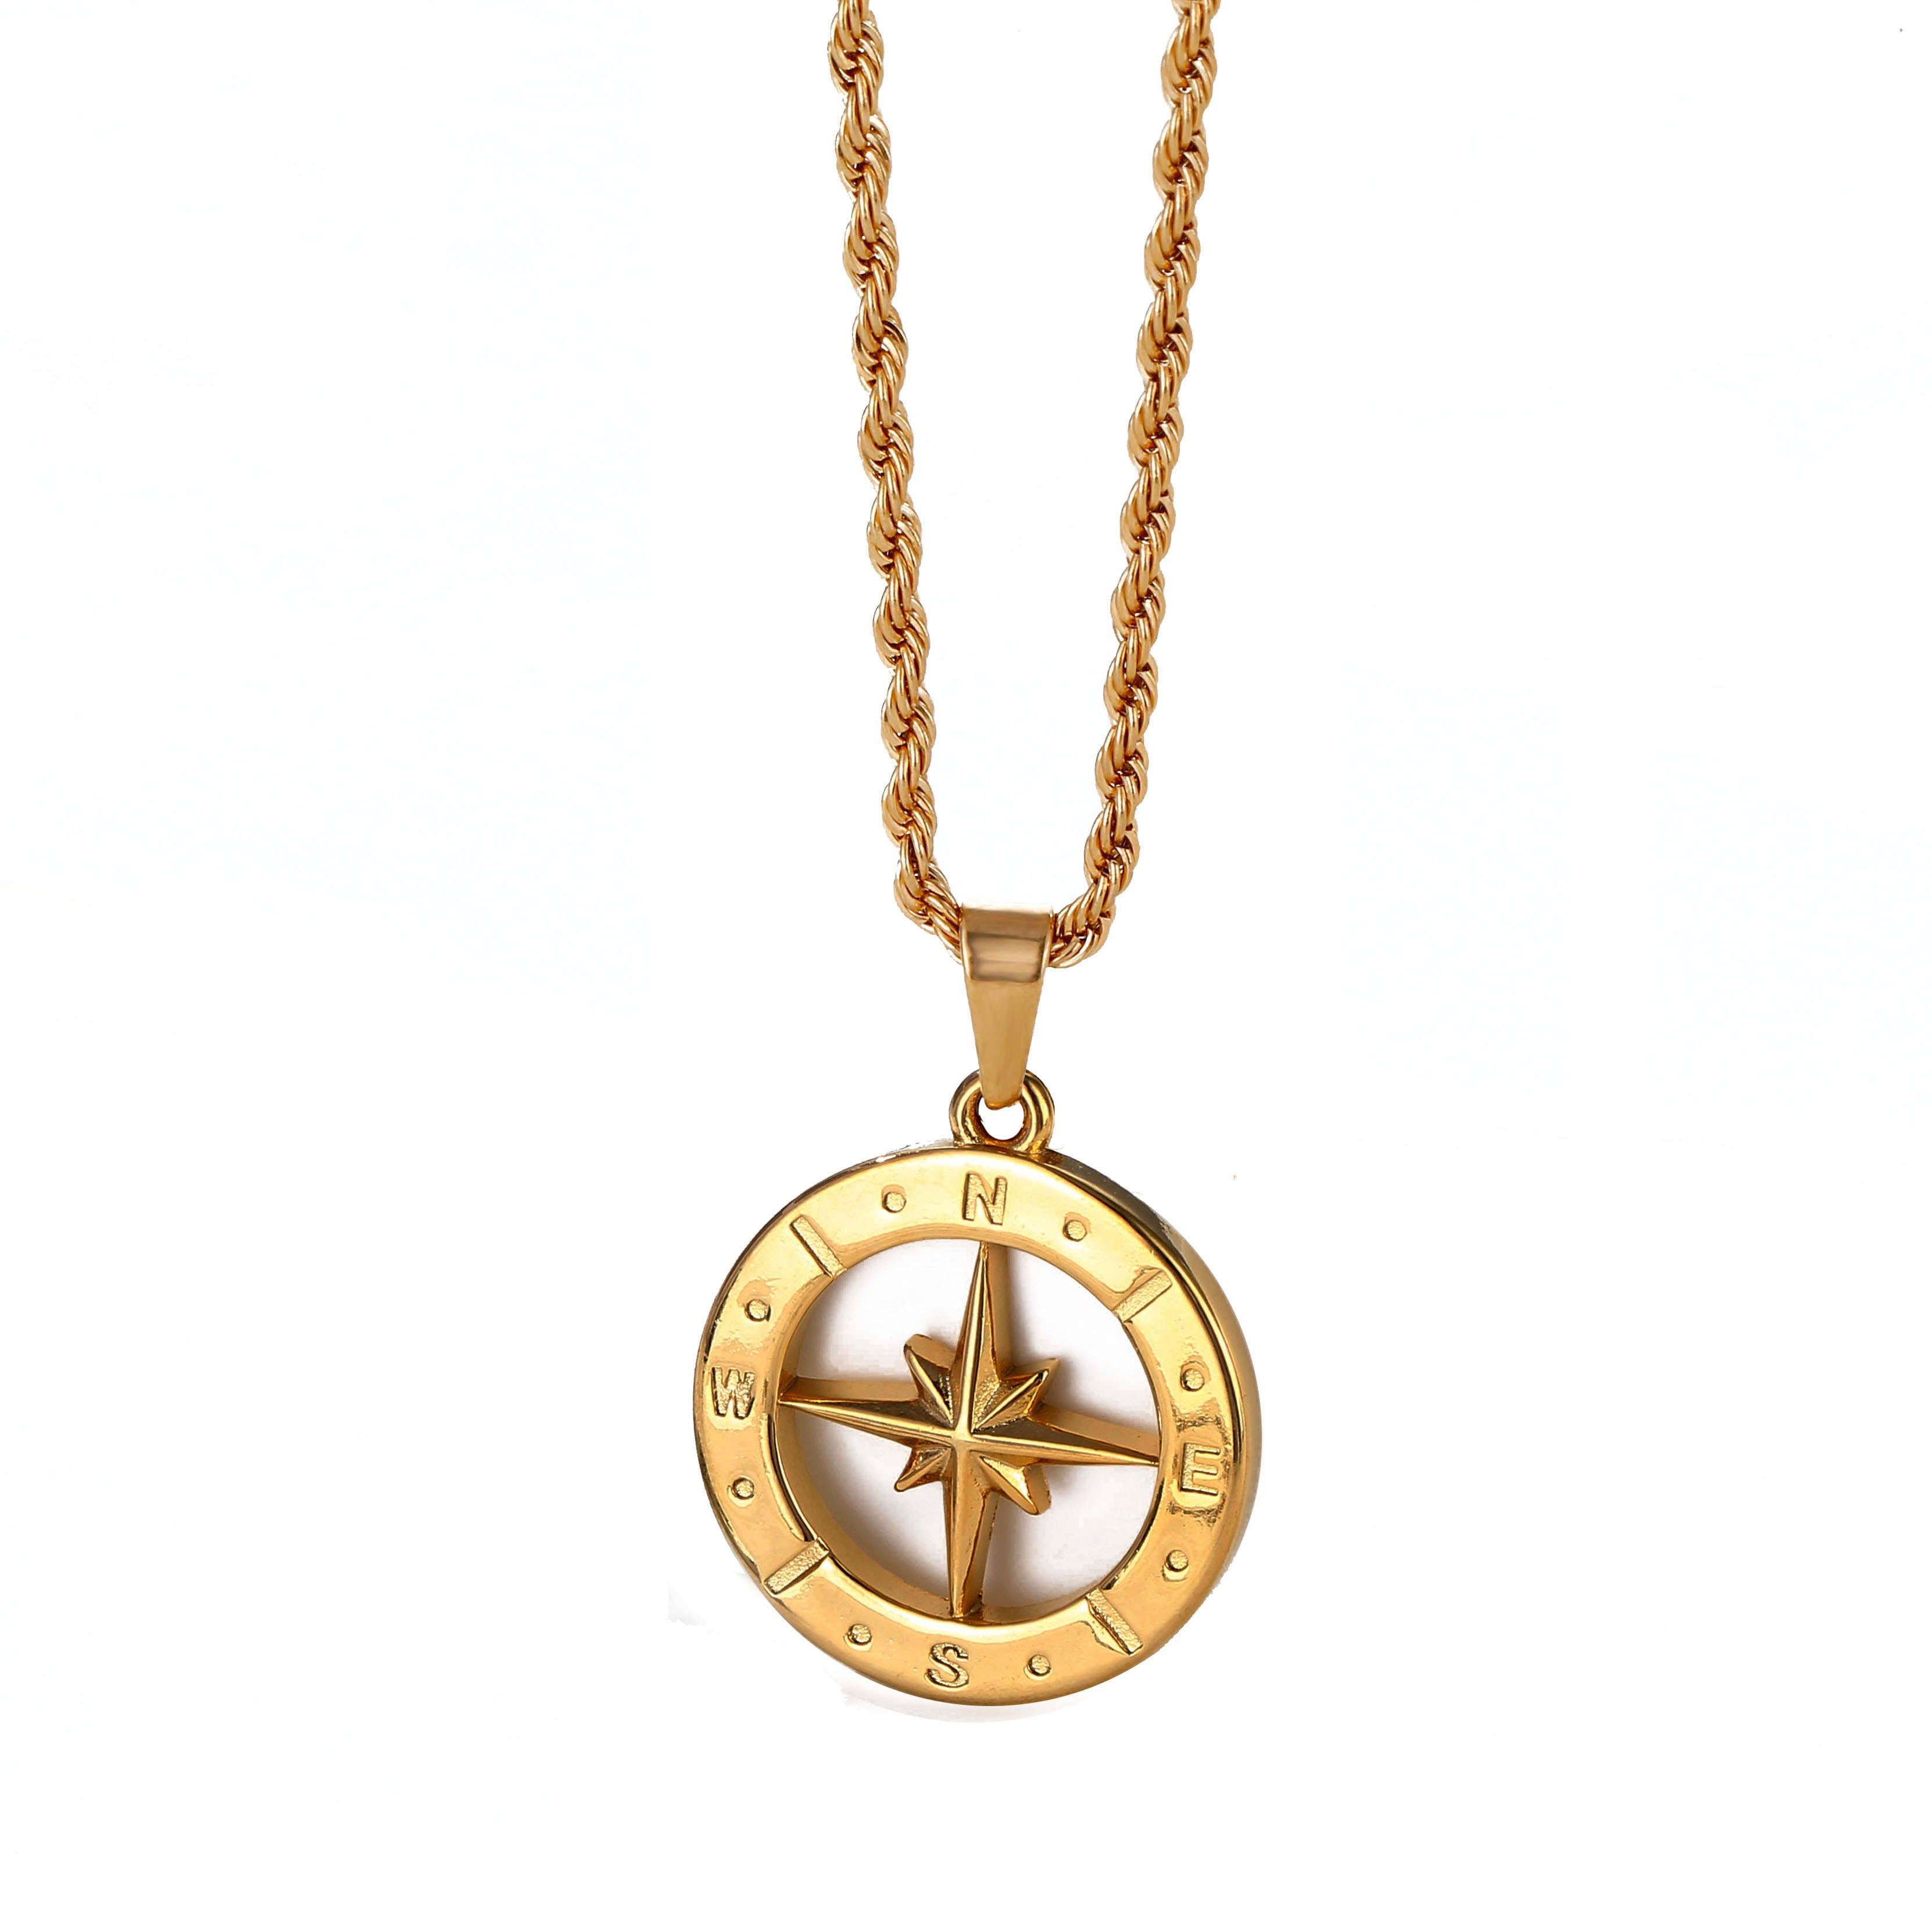 Northstar Pendant Necklace (Gold)